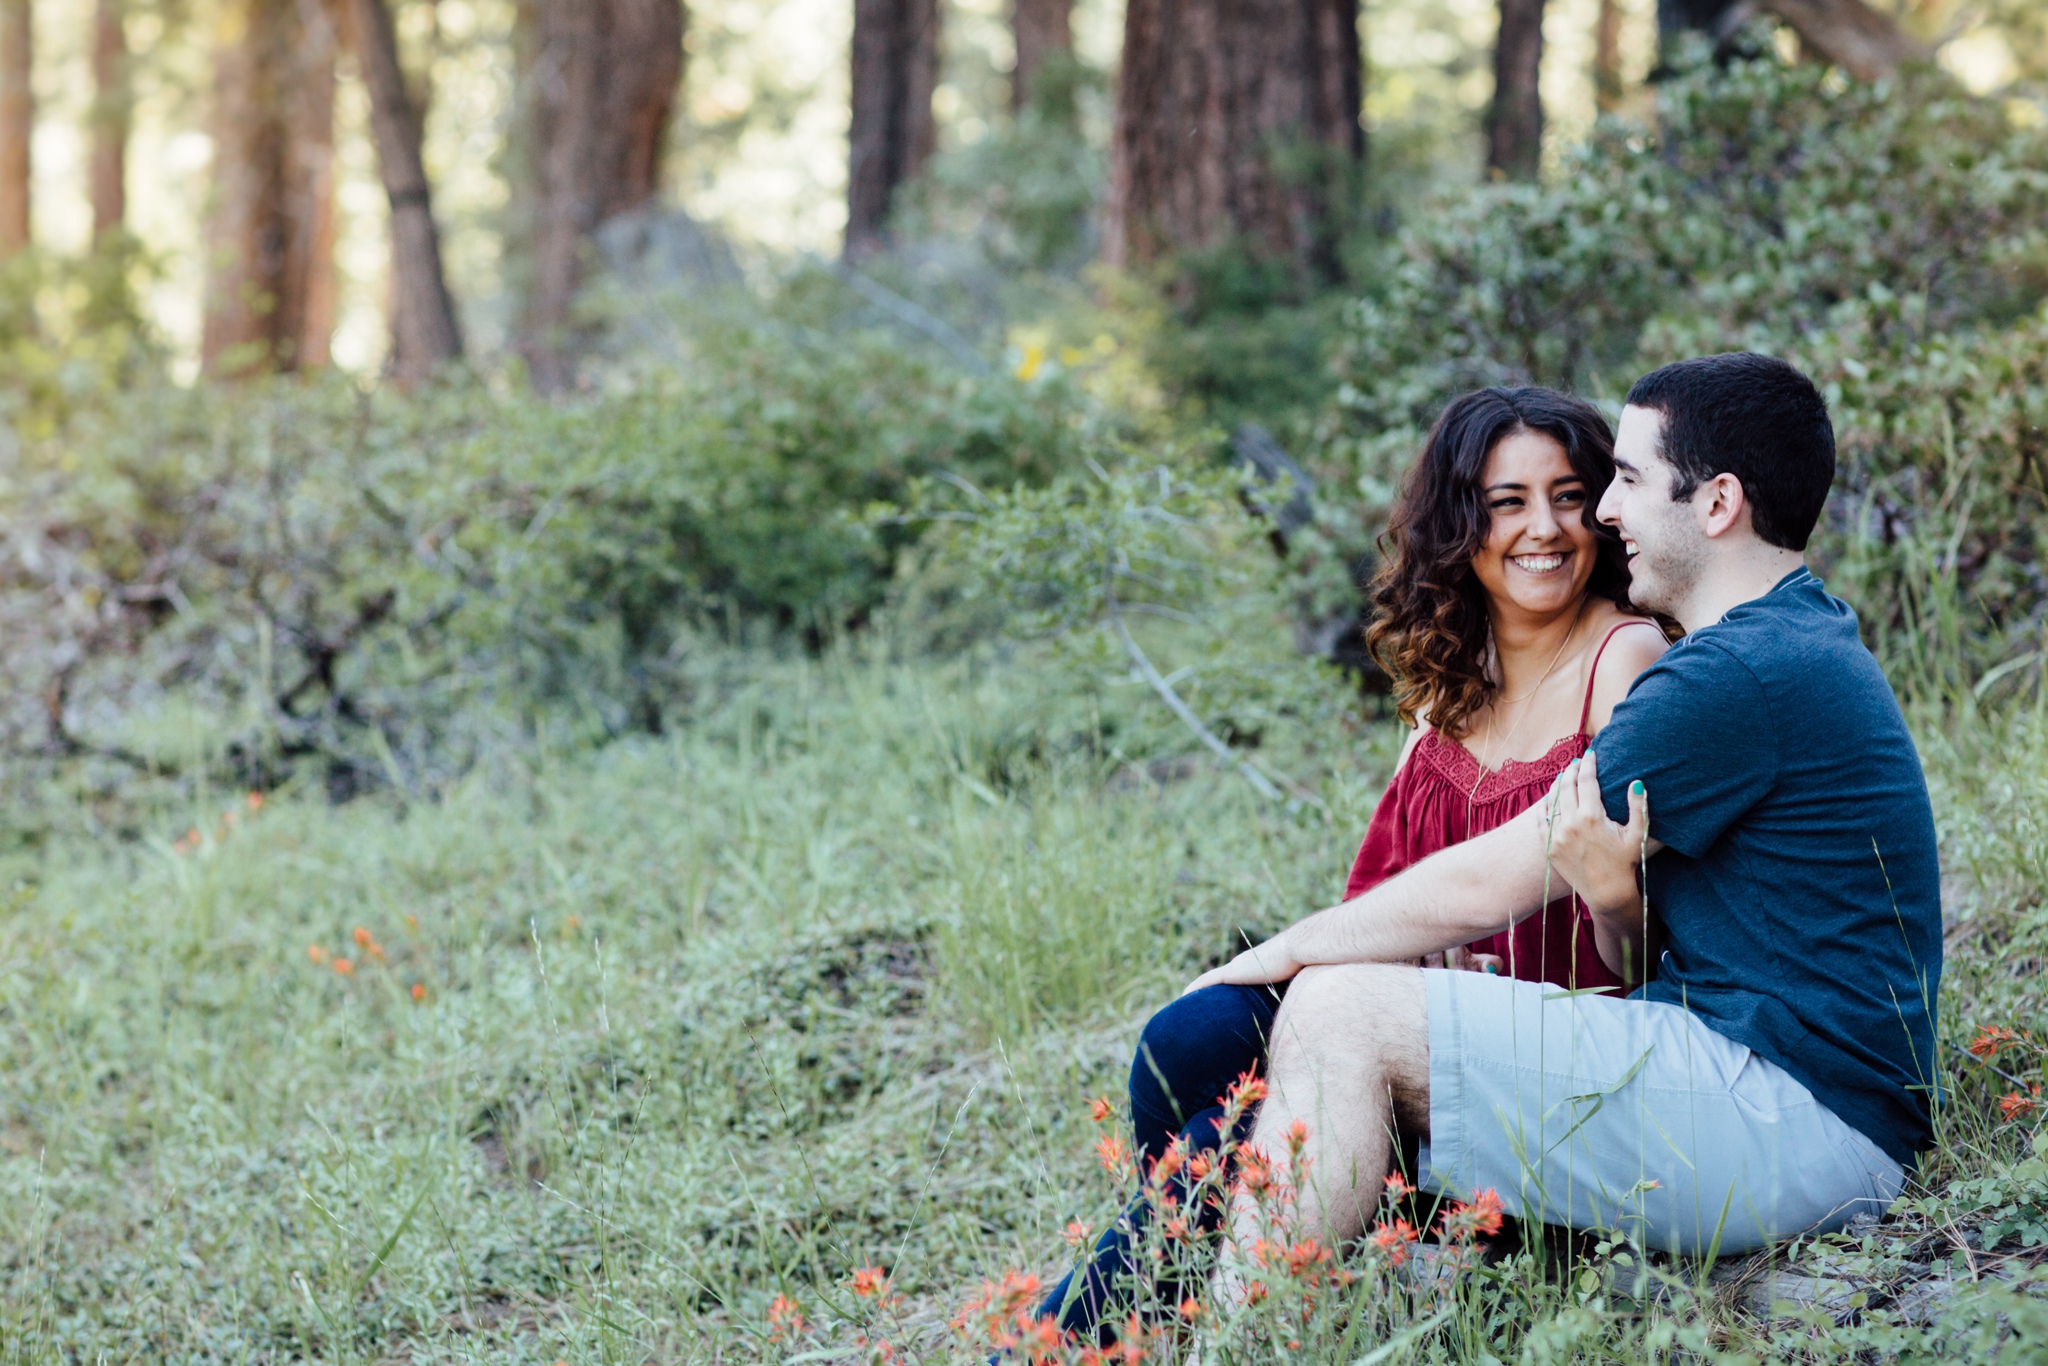 thedelauras_ostaraphotography_laketahoeengagement_laketahoeweddingphotograph_laketahoe_photographer_005